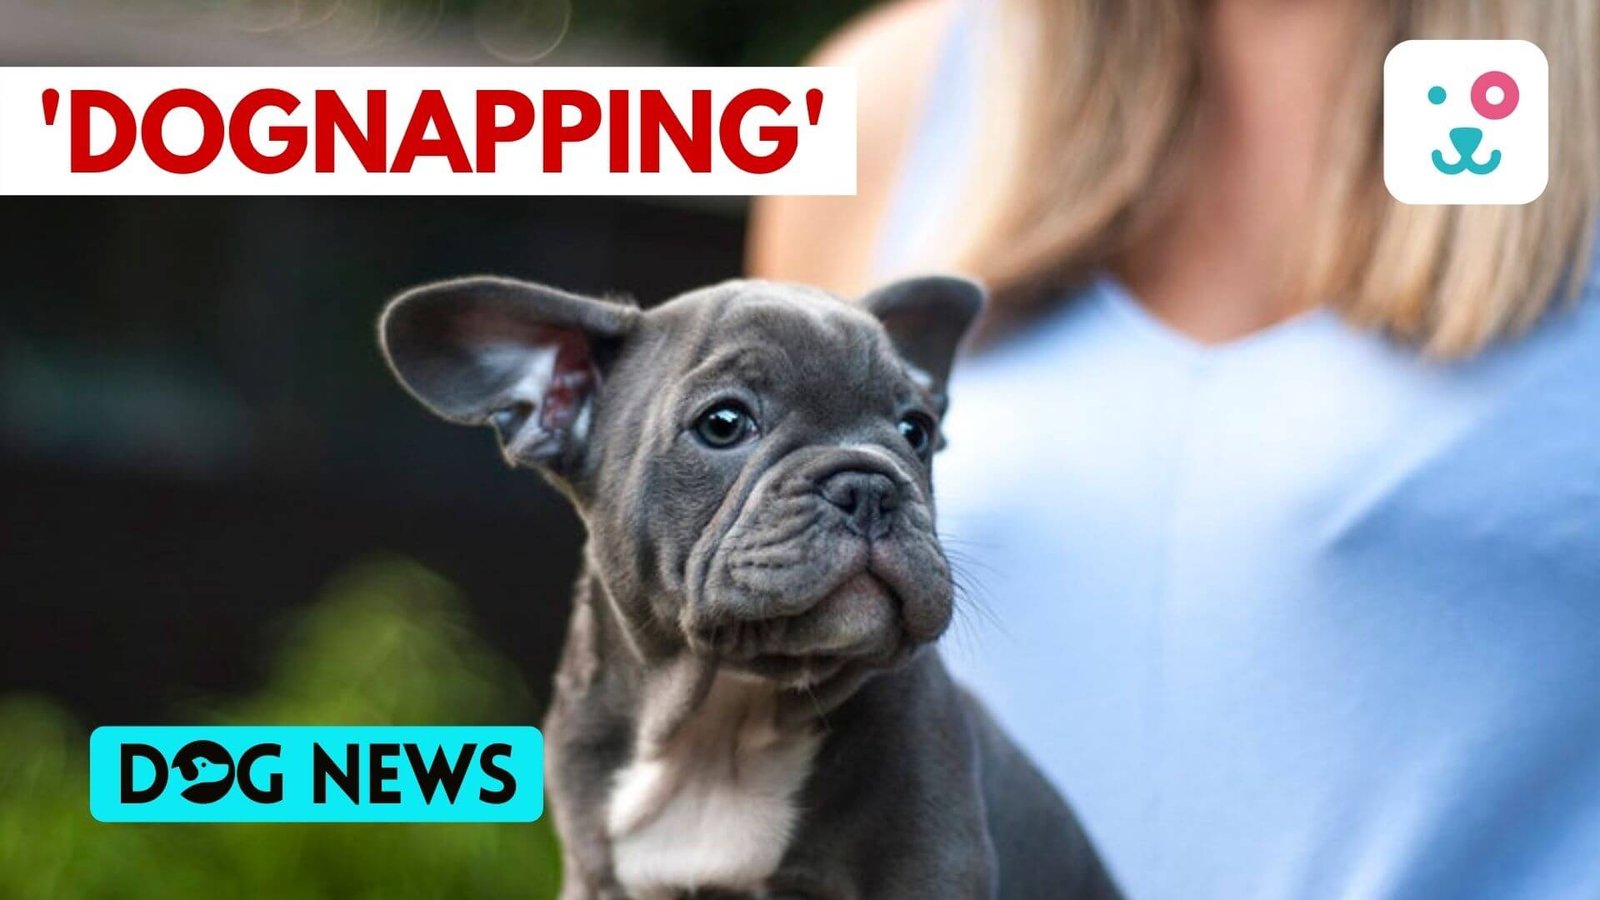 Cases of French Bulldog abduction rising in the US, leaving dog parents scared